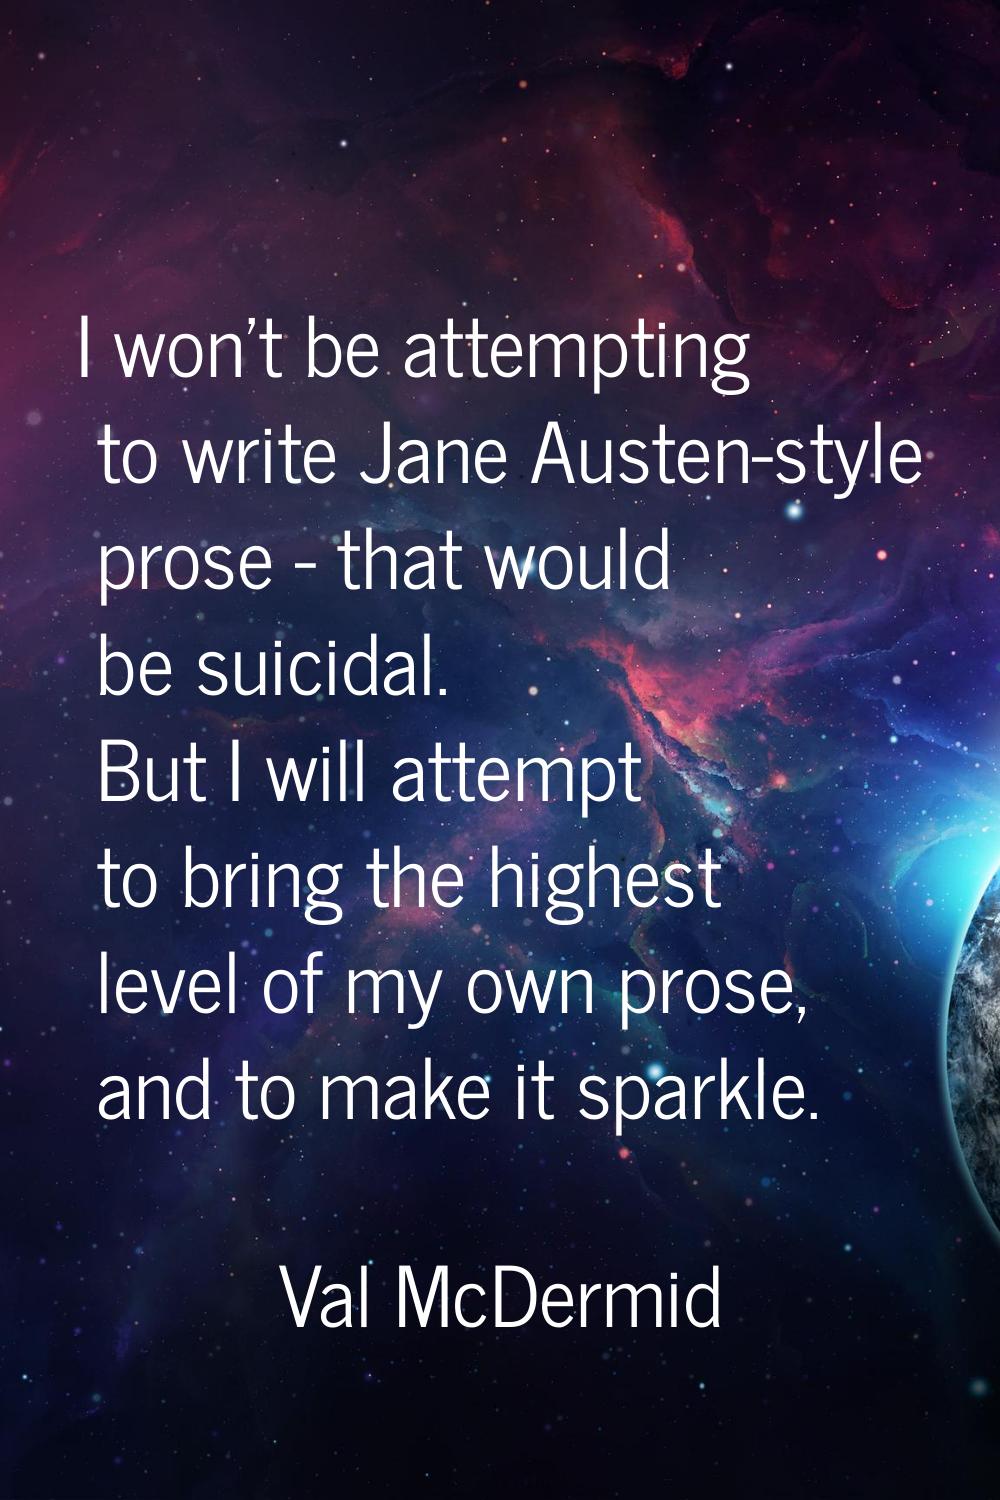 I won't be attempting to write Jane Austen-style prose - that would be suicidal. But I will attempt